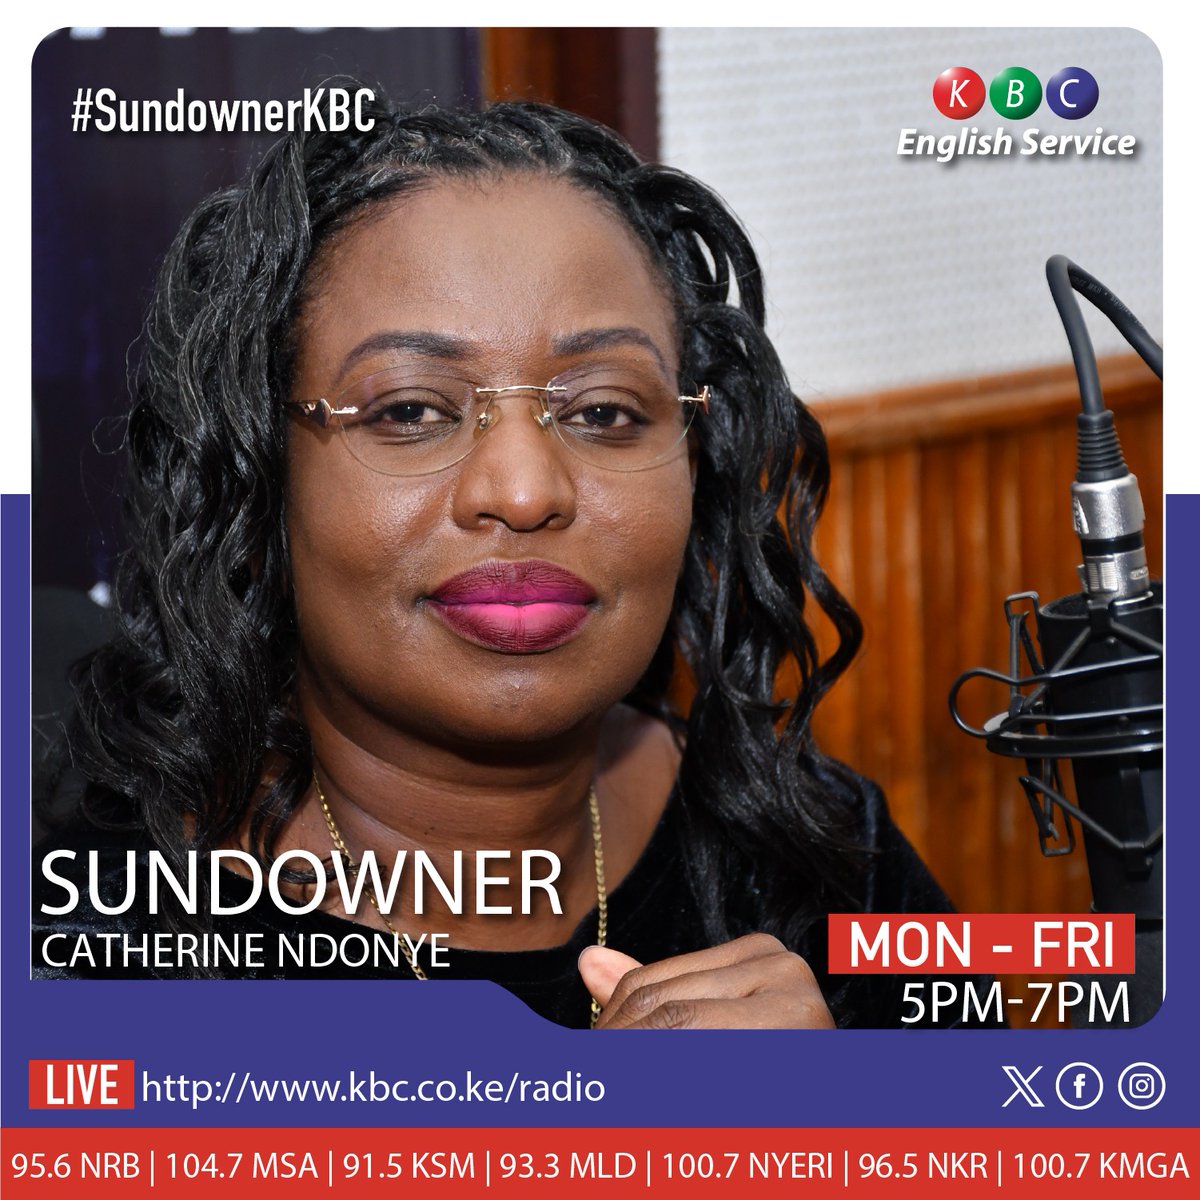 “Don’t wait for Friday to be happy. Find joy and gratitude every Thursday.” #SundownerKBC is the perfect joint. On @kbcenglish LIVE: kbc.co.ke/radio/